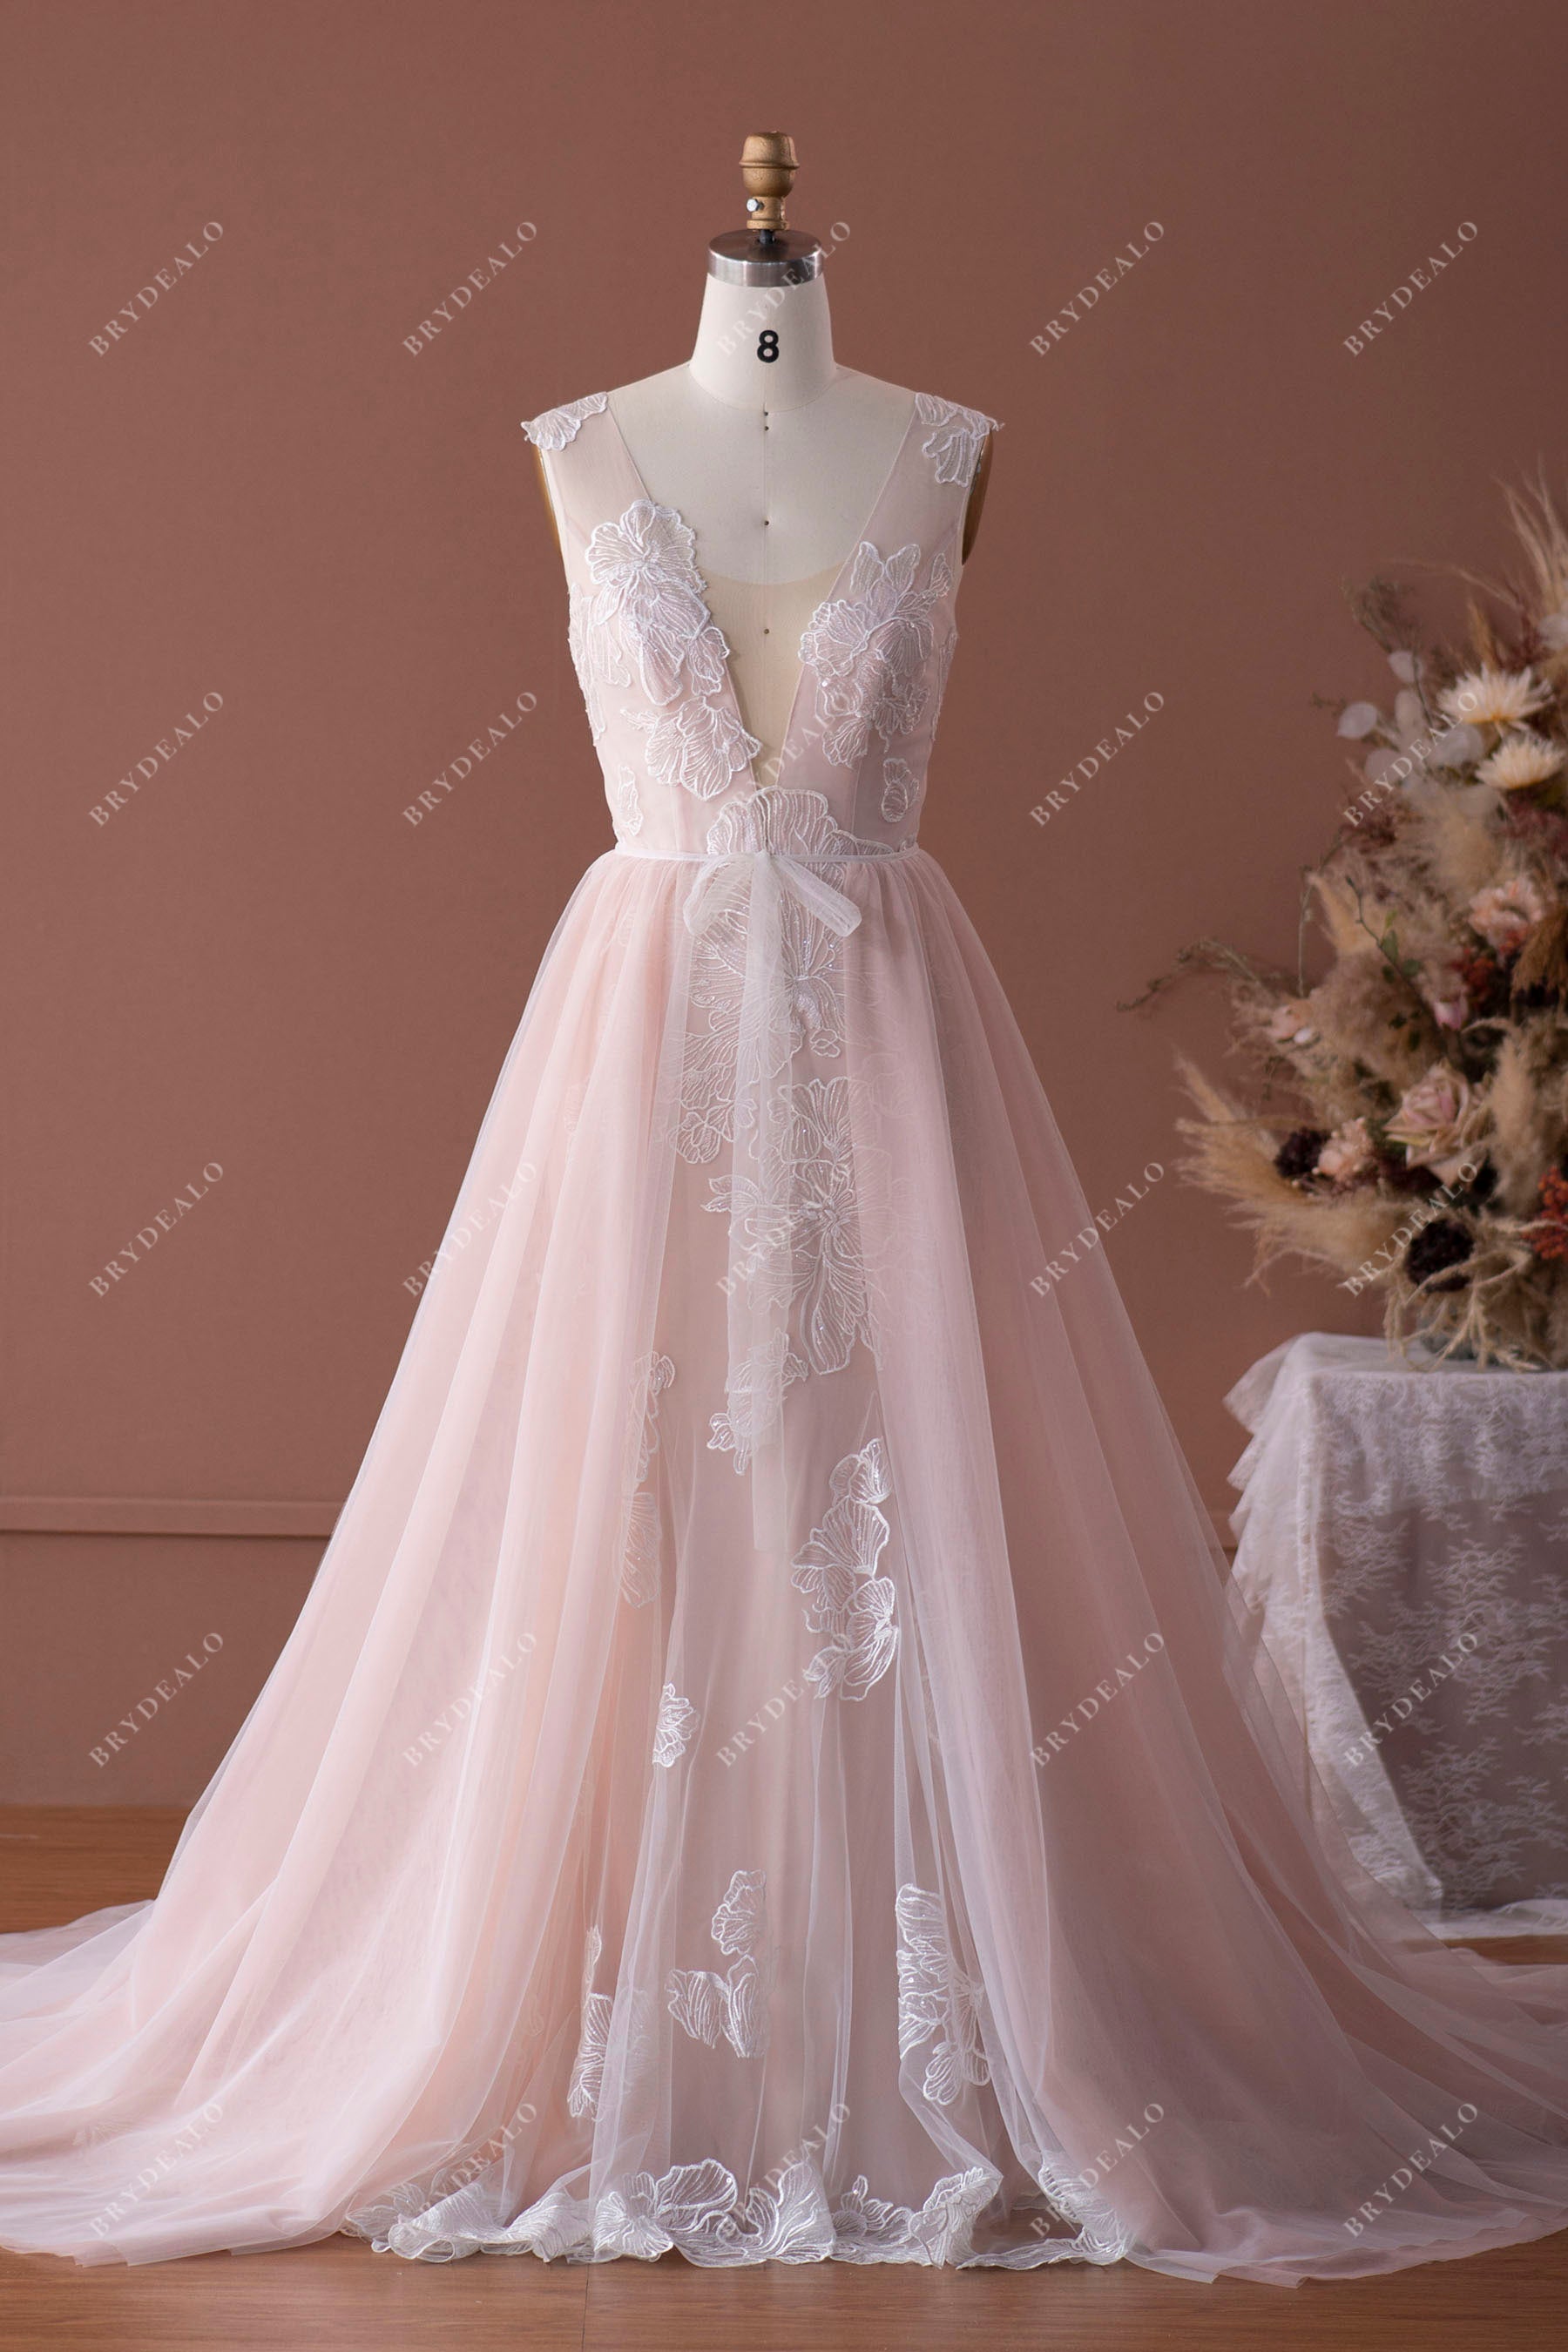 Dusty Rose Lace Plunging Sleeveless Overskirt Bridal Gown